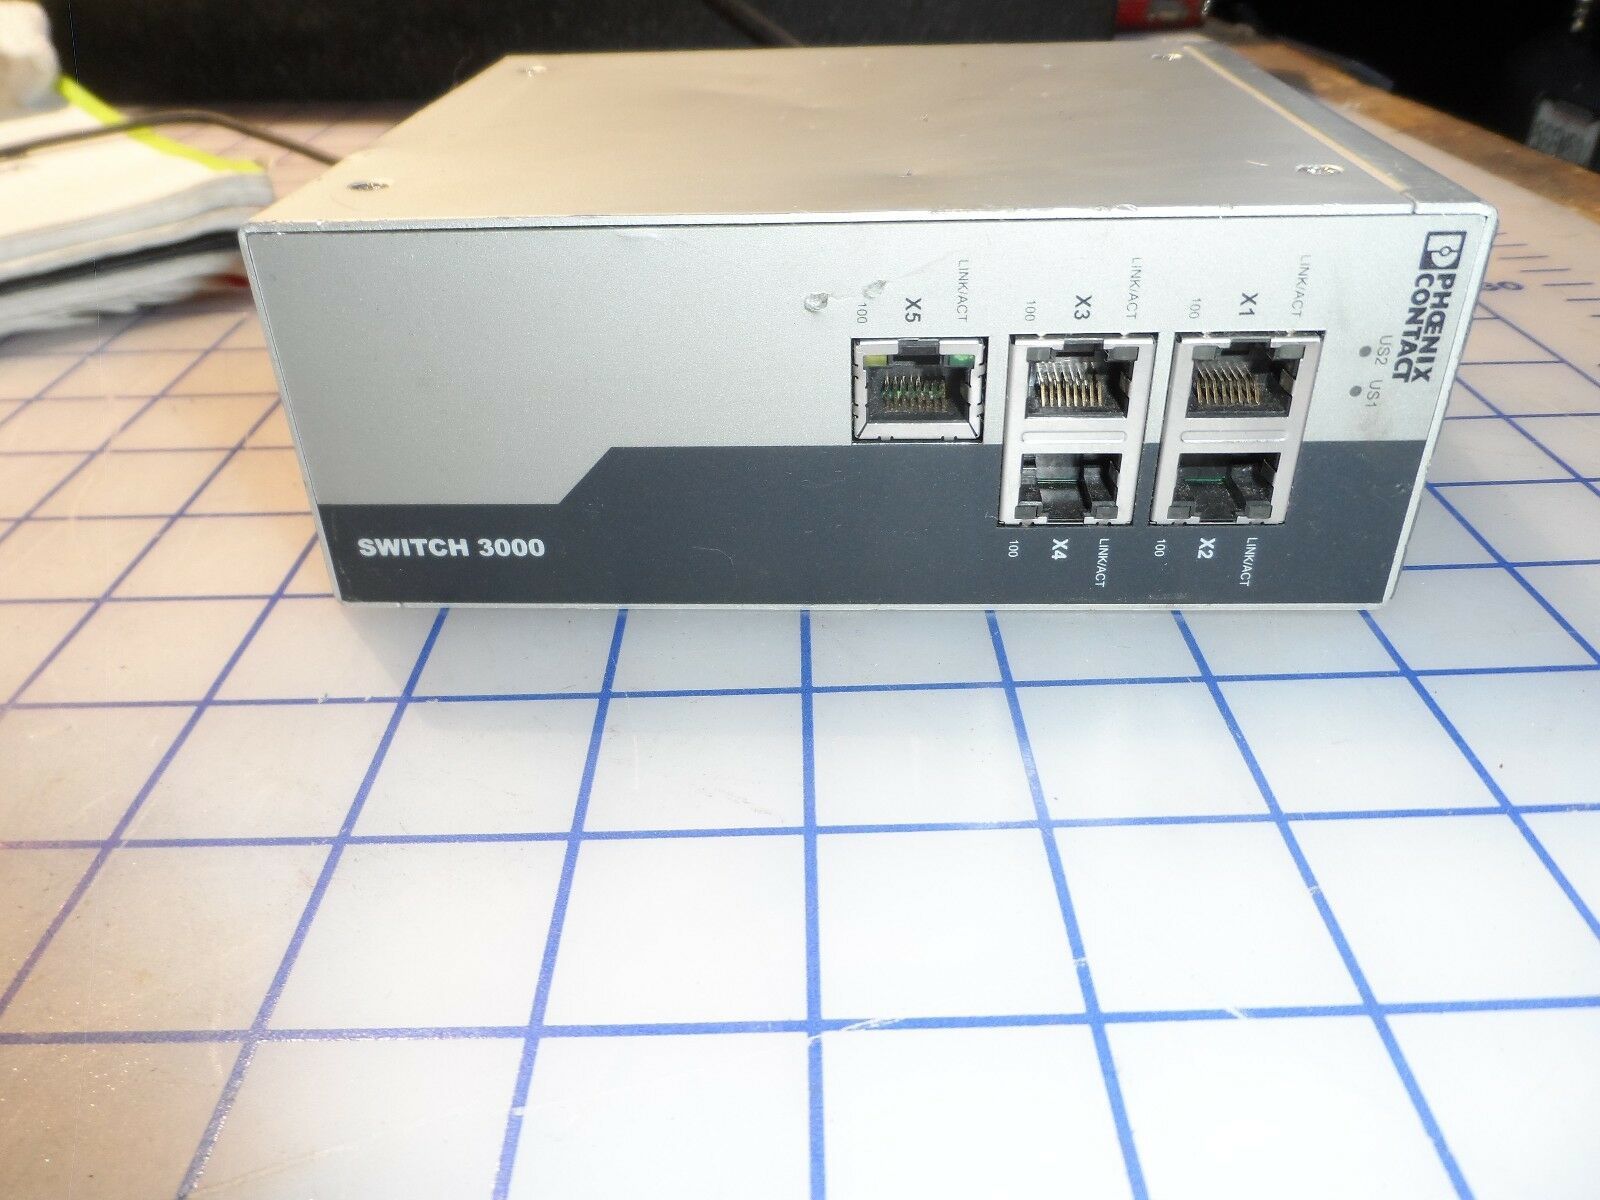 FL Switch 3005T Phoenix Contact Ethernet Switch 3000  2891032 - $130.89